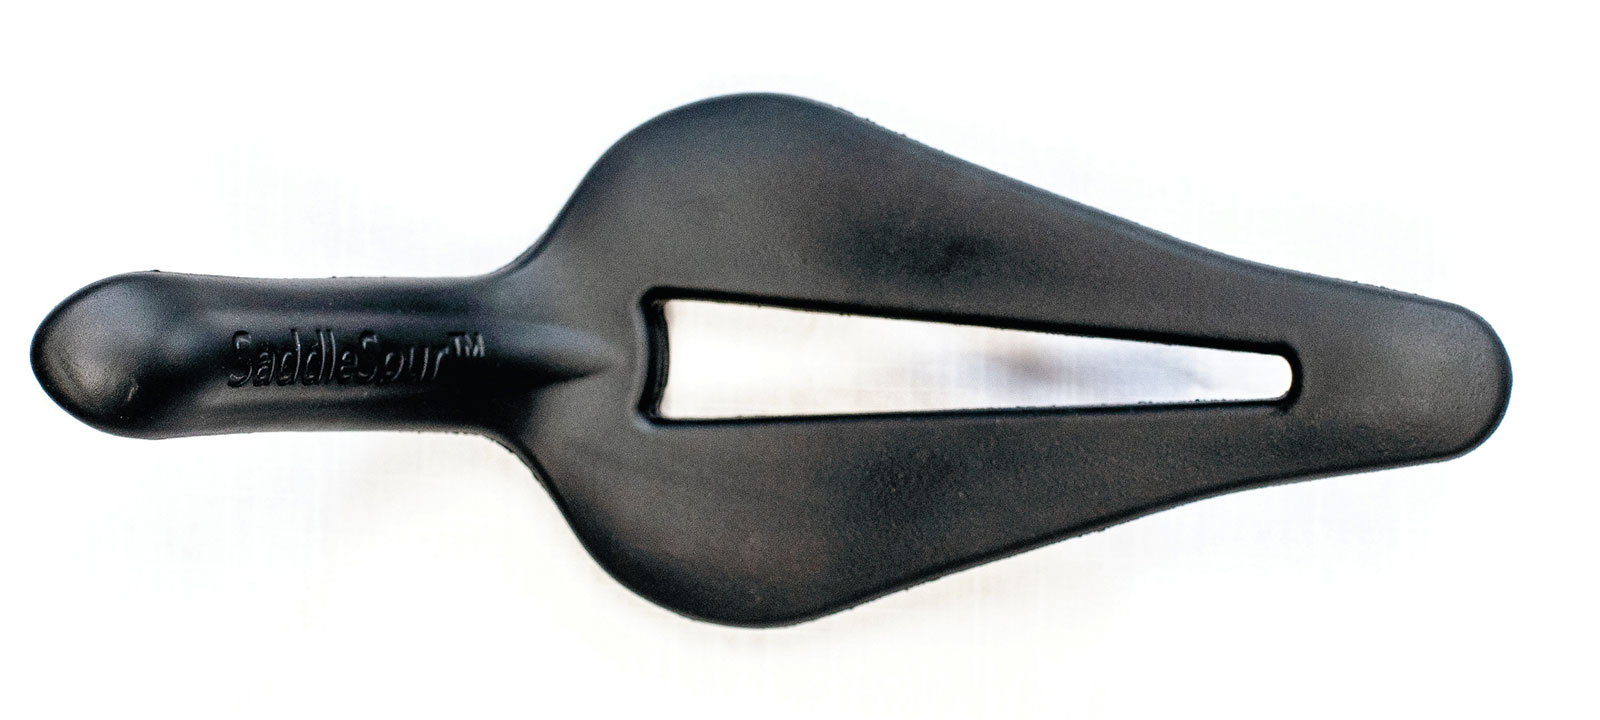 SaddleSpur unique ergonomic cycling saddle design with rear coccyx support, top view